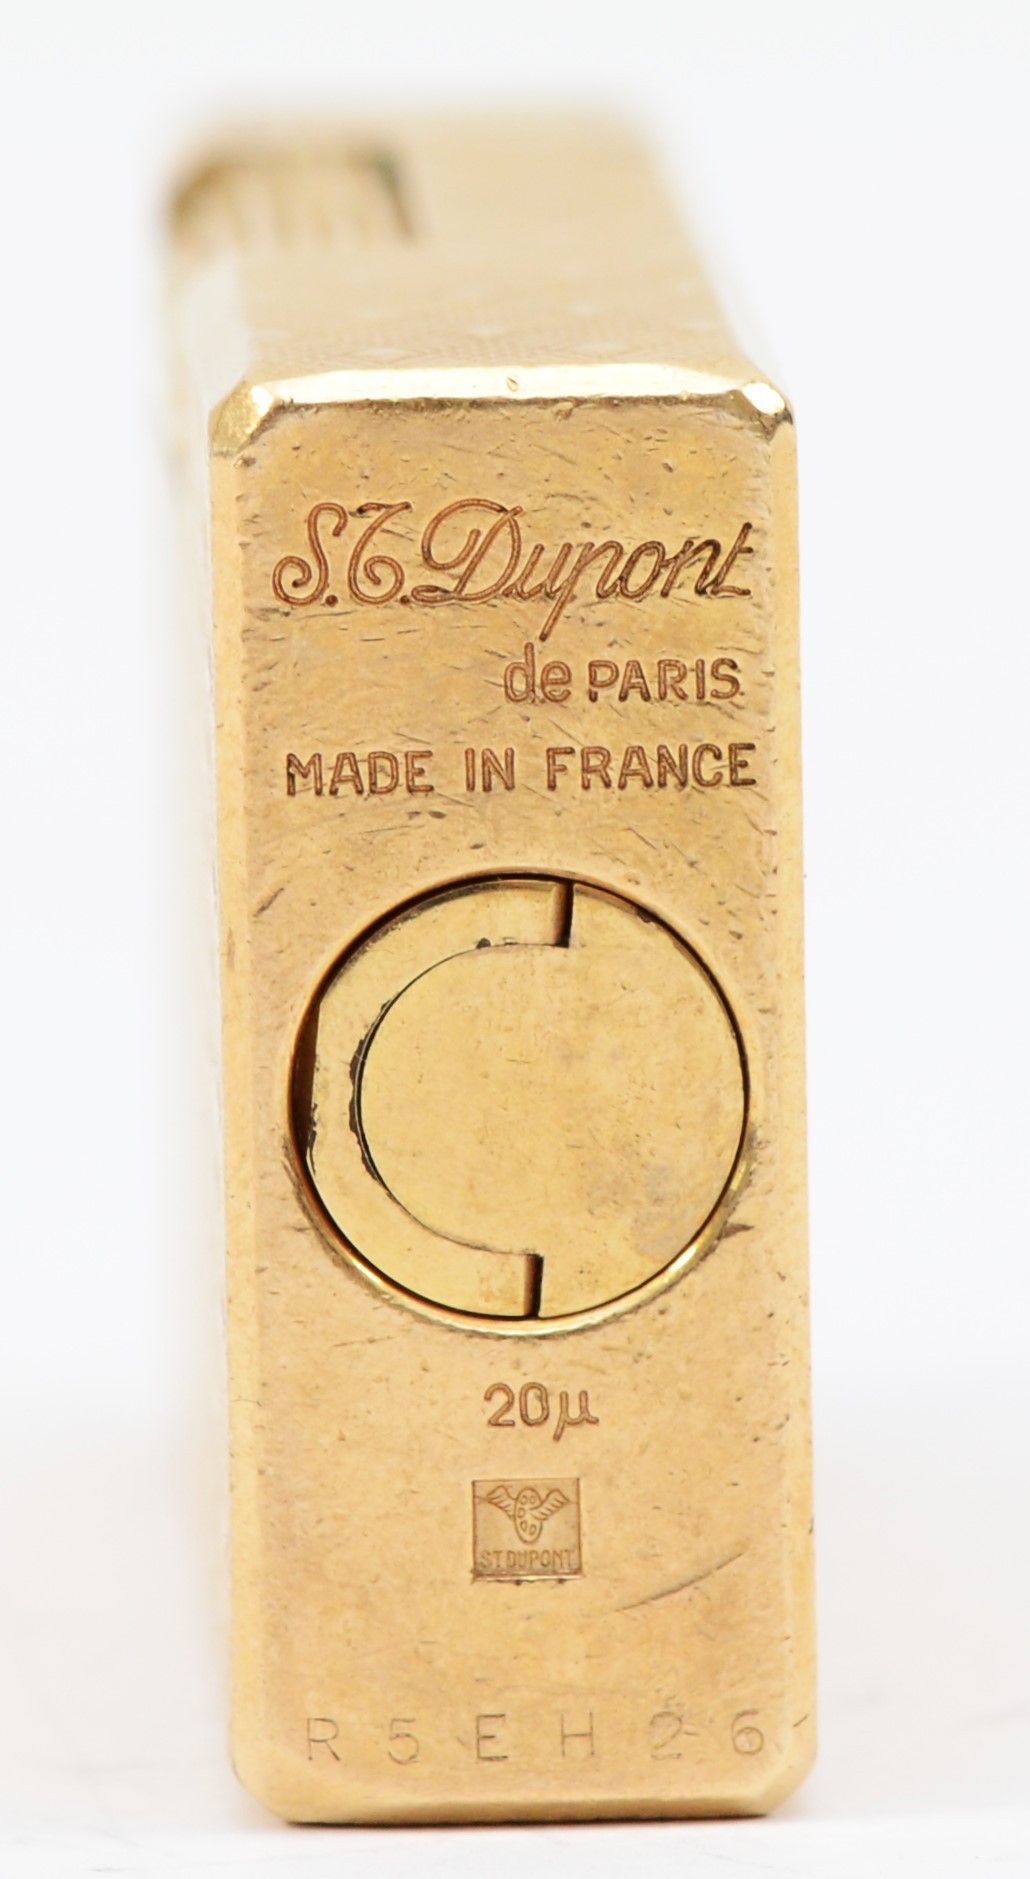 S.T. Dupont, Paris, a gold plated gas lighter, R5EH26, with cross hatched body, 5.8cm - Image 4 of 4